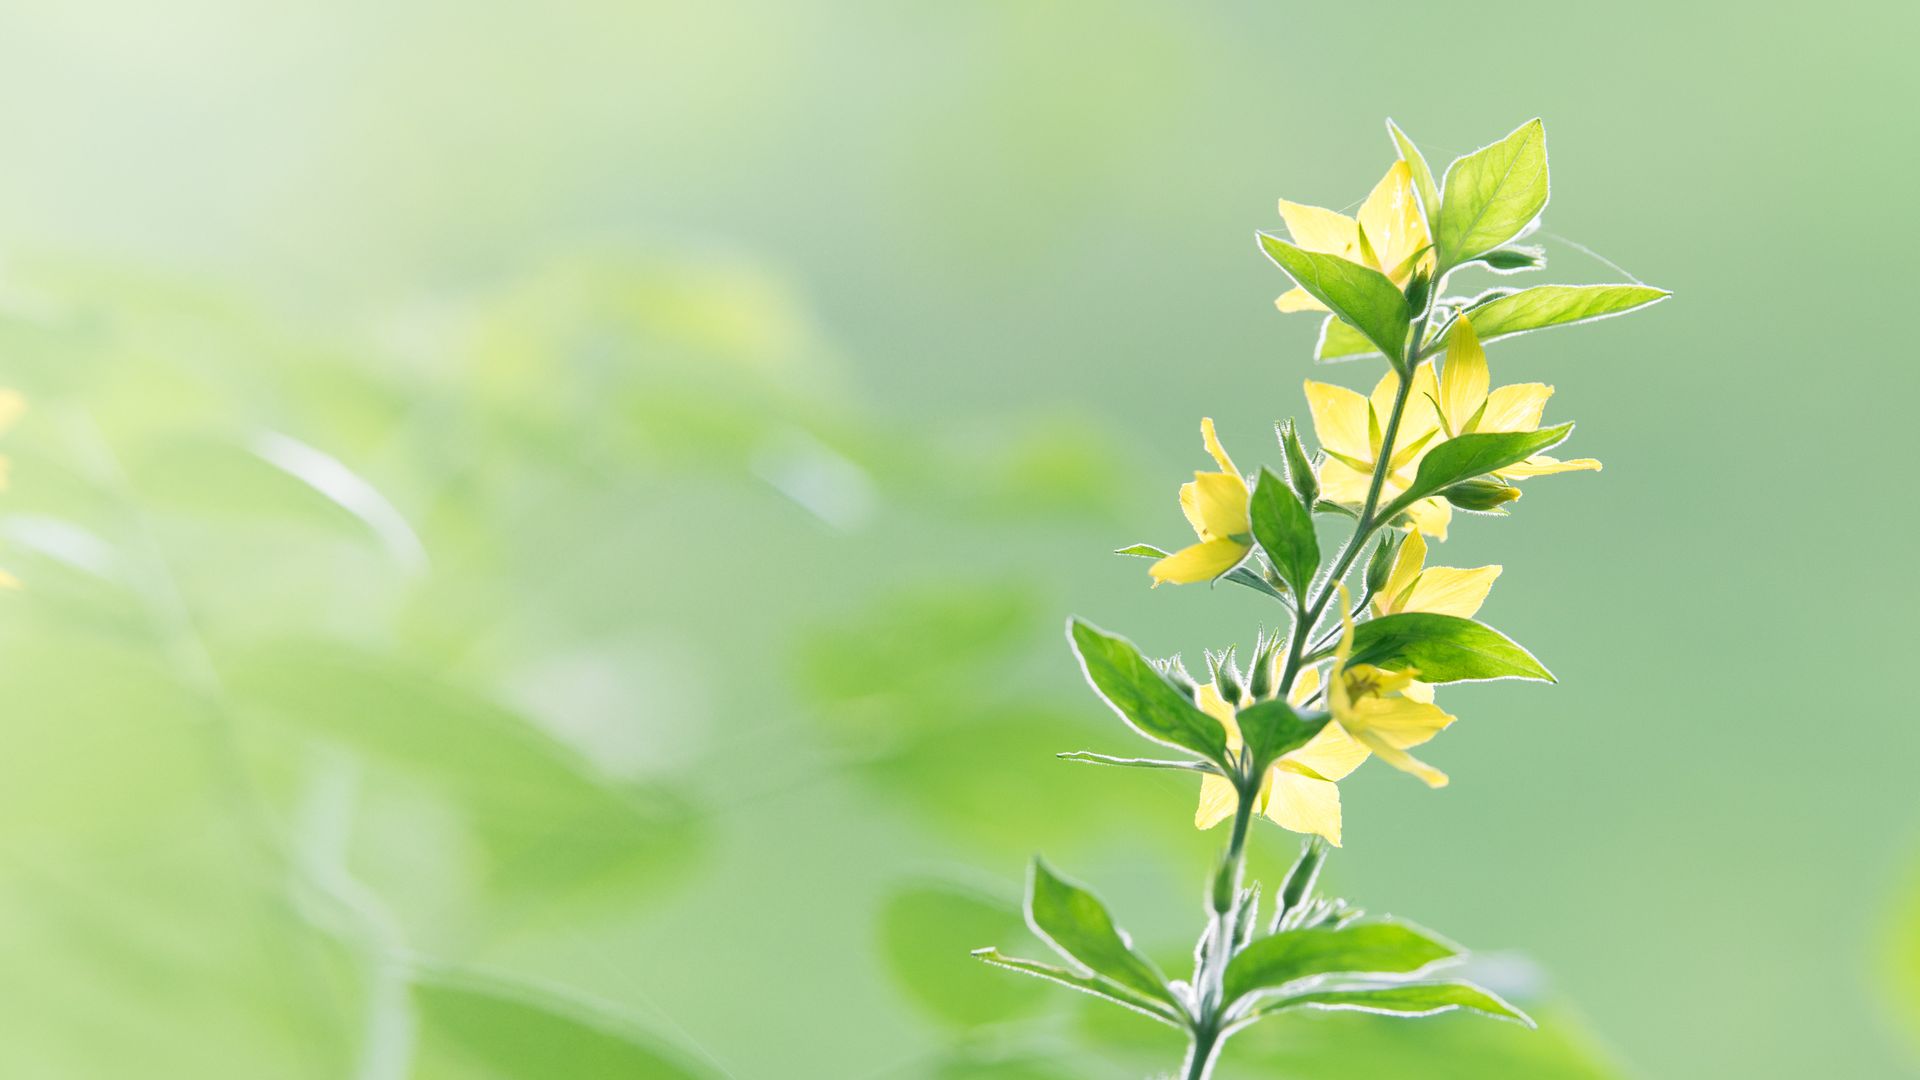 1920x1080 Yellow Flowers Green Leaves Blurred Wallpaper